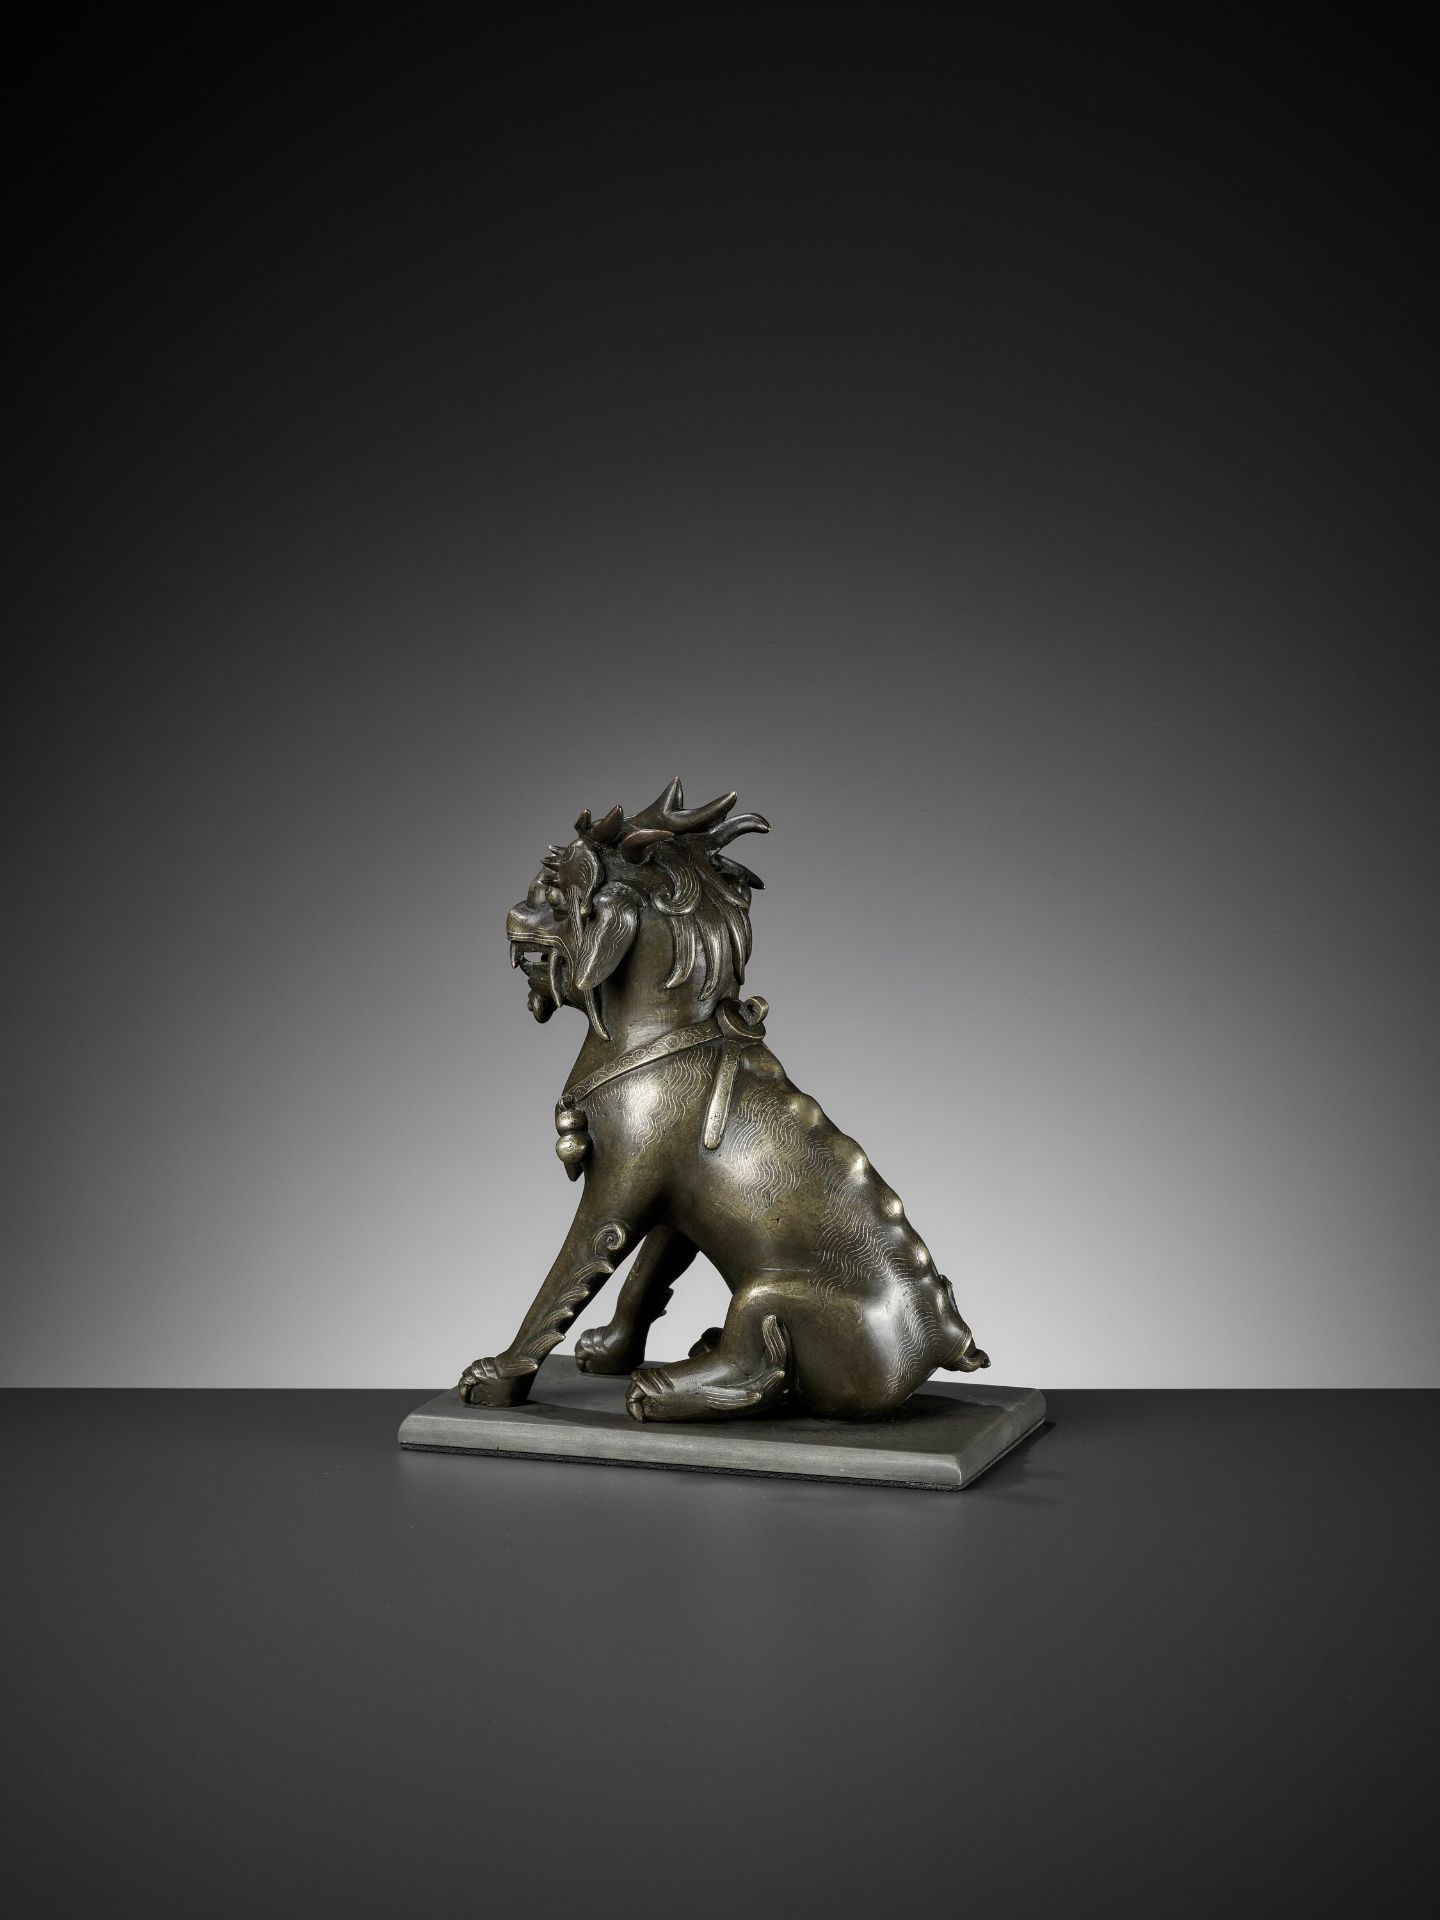 A SILVER WIRE-INLAID BRONZE FIGURE OF A QILIN, ATTRIBUTED TO SHISOU, QING DYNASTY - Image 6 of 12